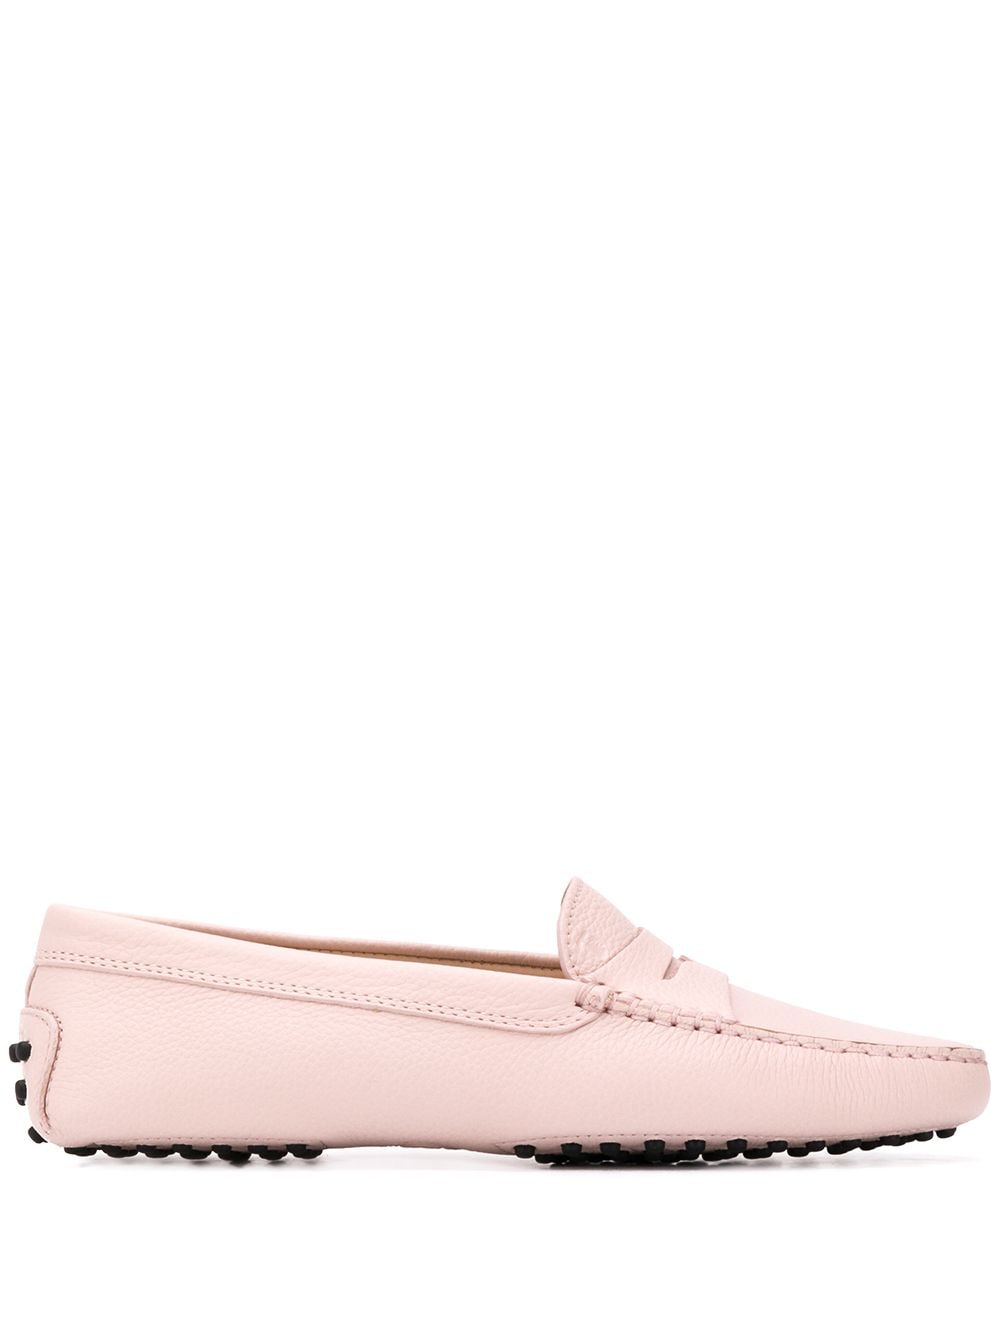 Tod's Gommino driving shoes - Pink von Tod's